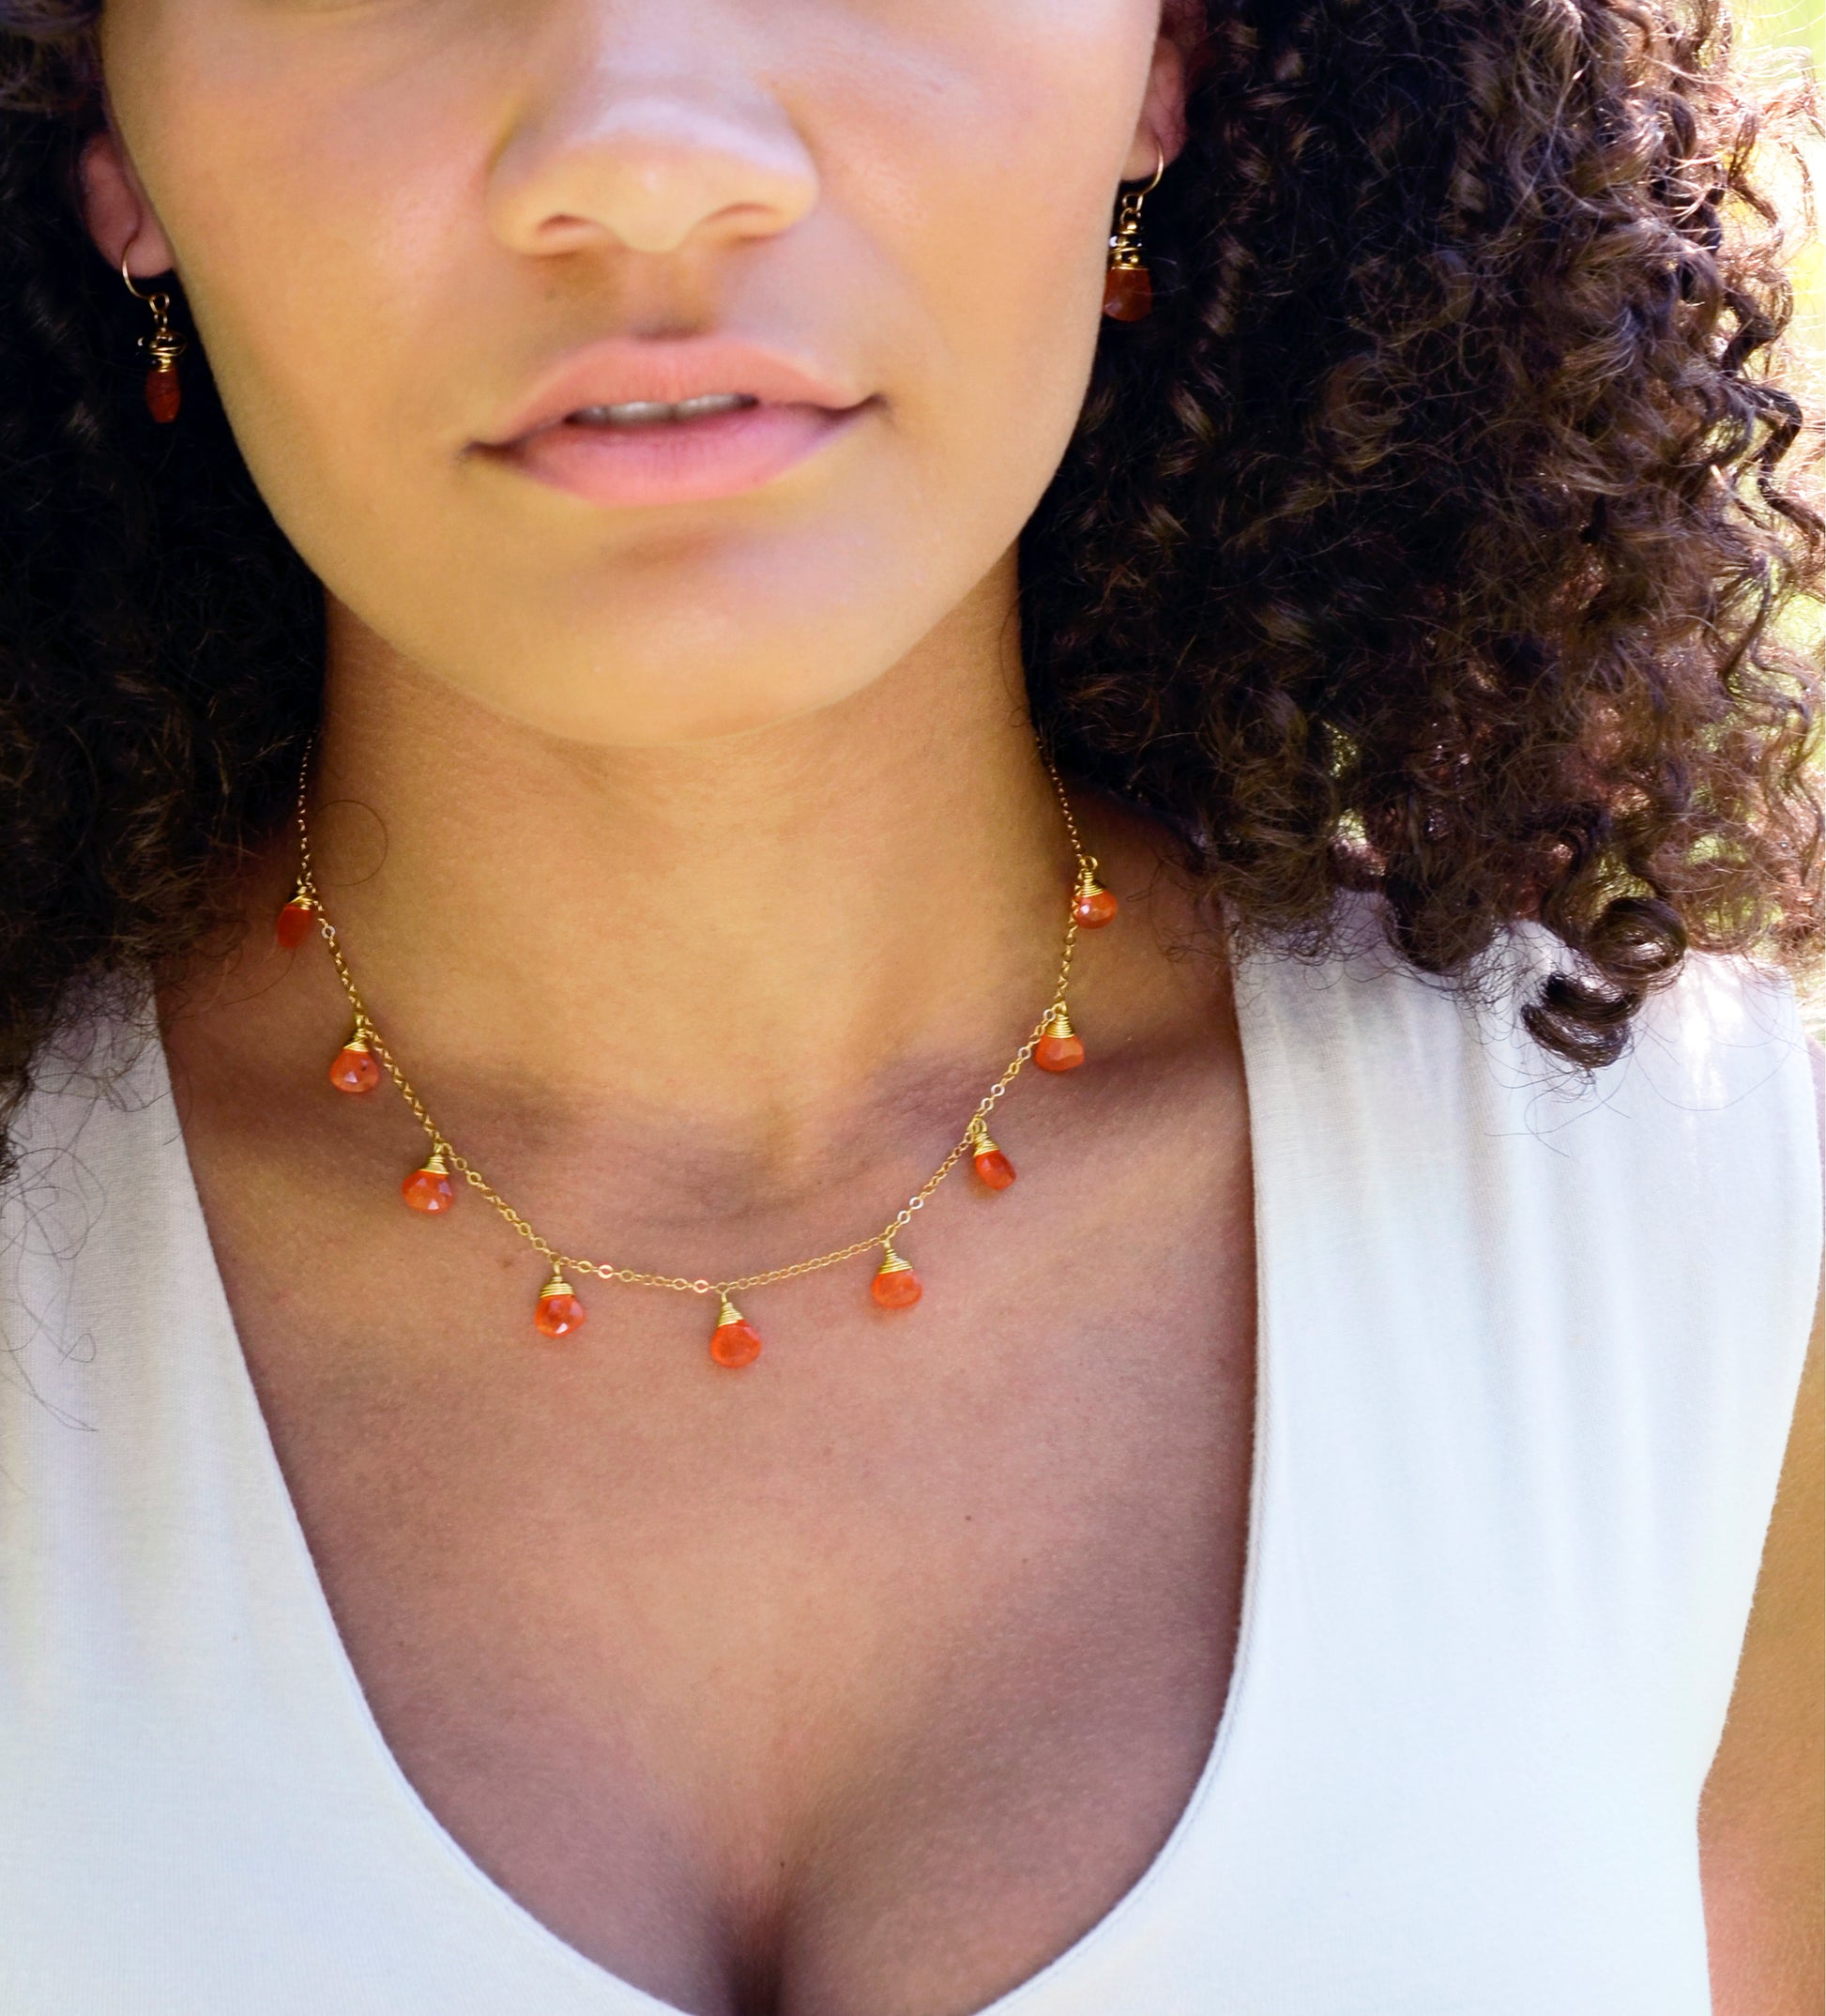 Handmade necklace featuring nine natural Carnelian gemstones set onto a gold filled chain. Sterling Silver is also available. Modeled Image.